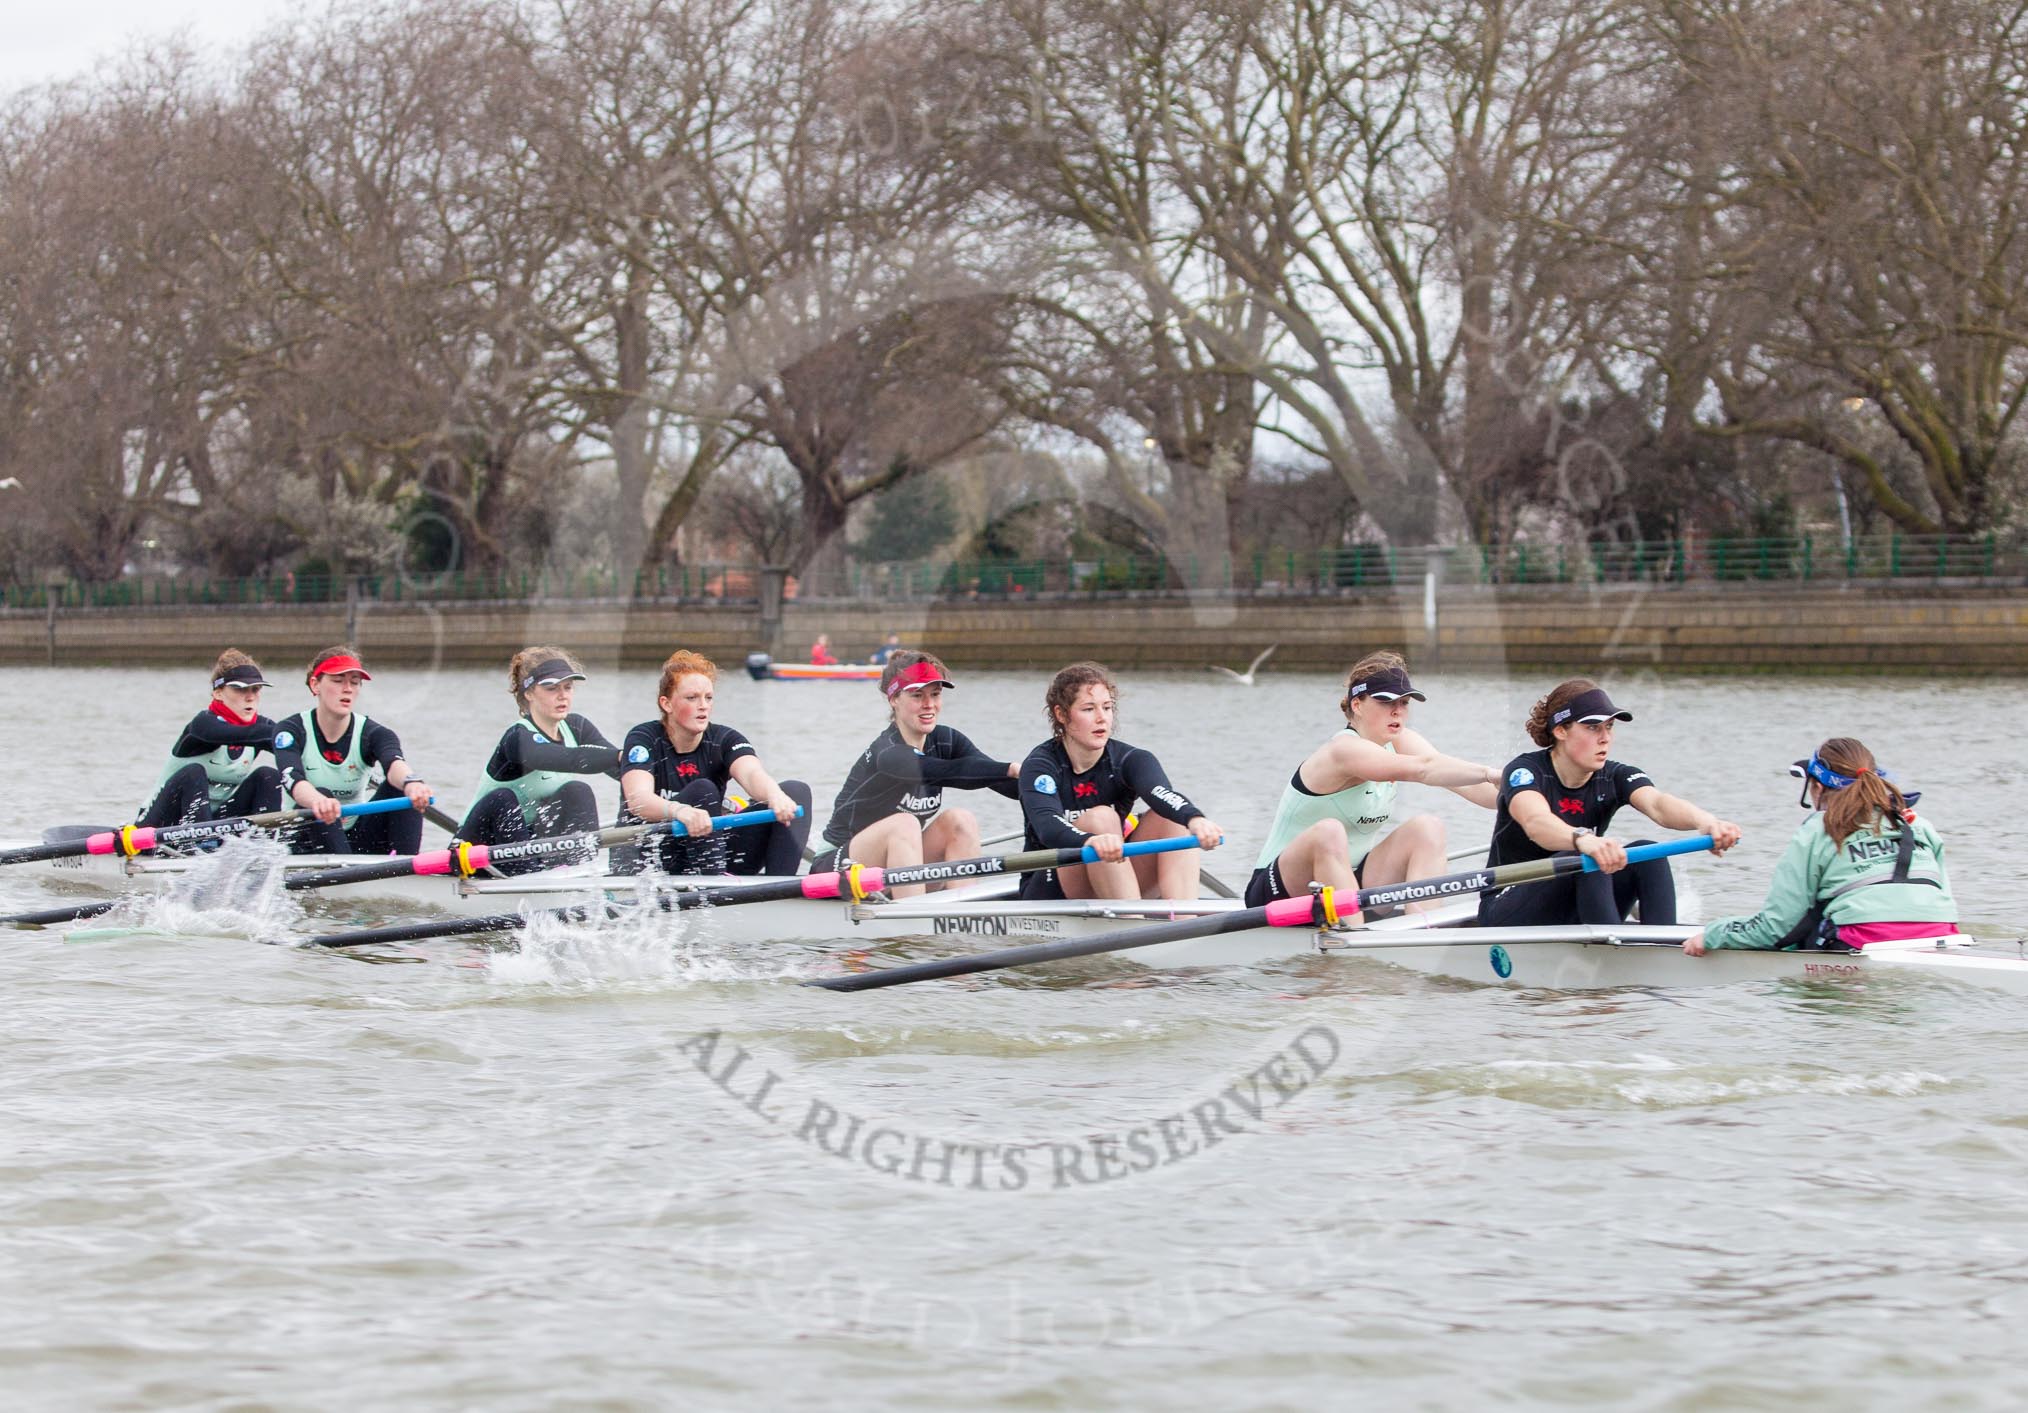 The Boat Race season 2014 - fixture CUWBC vs Thames RC.




on 02 March 2014 at 13:56, image #138